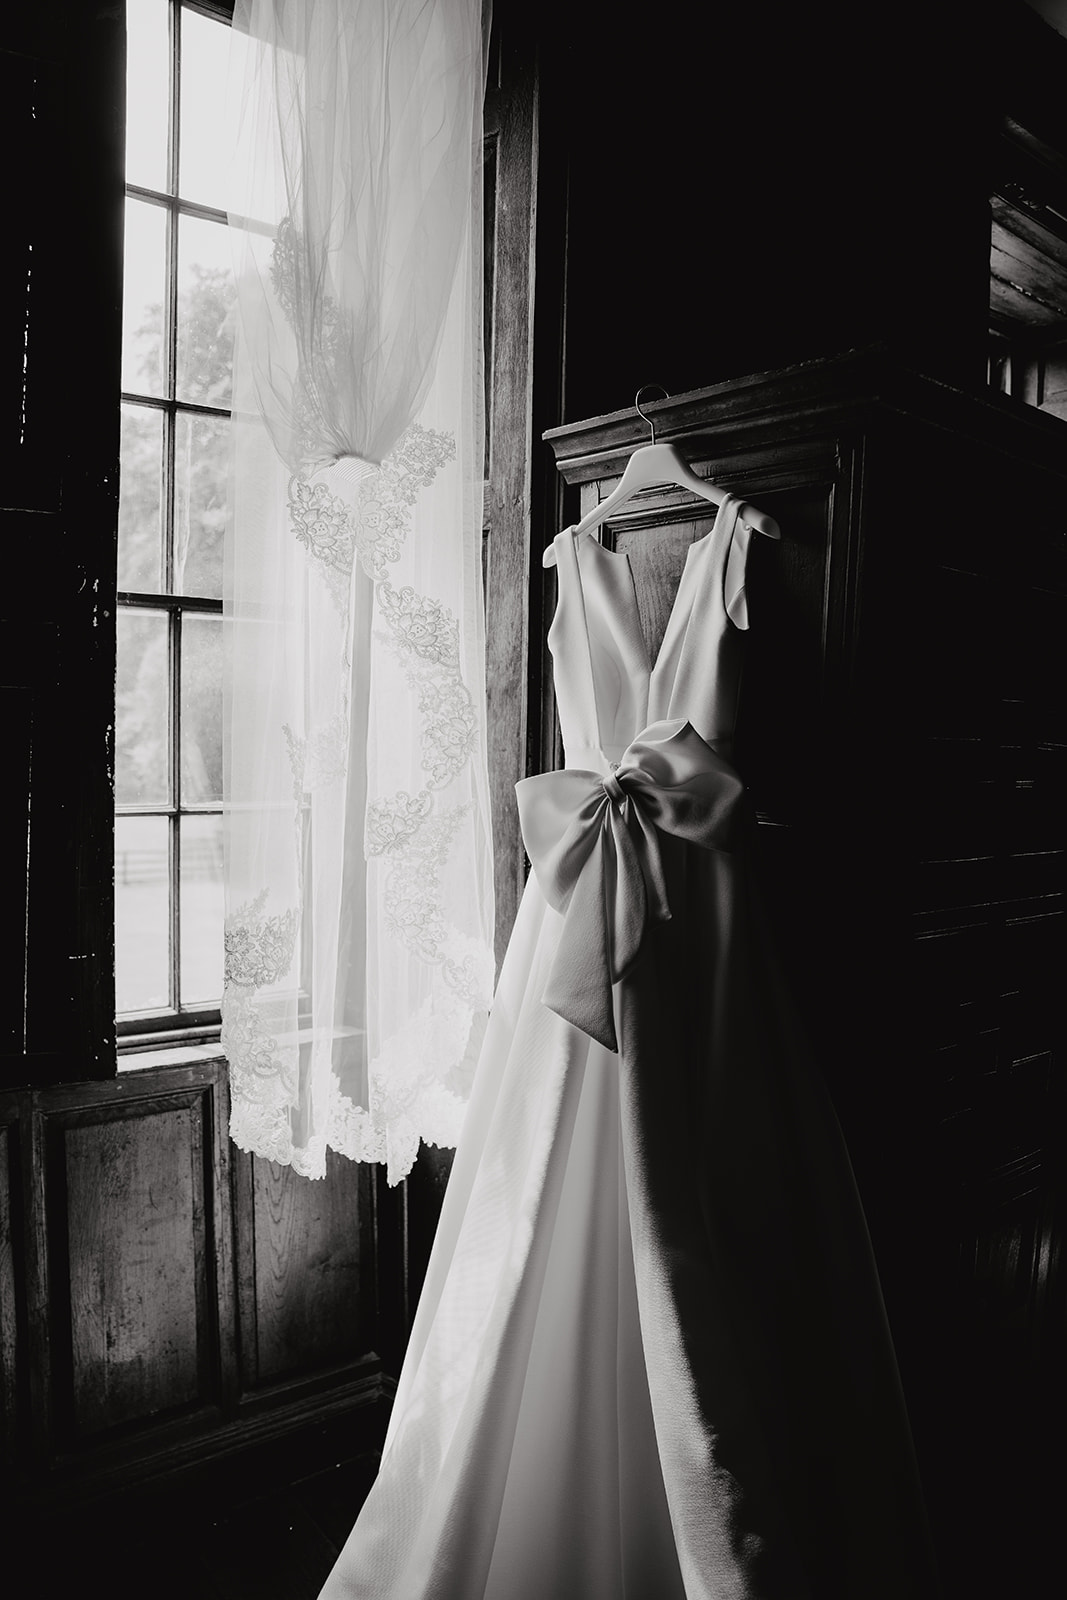 Back and white detail of the wedding dress hanging, showing the beautiful bow detail on the back.